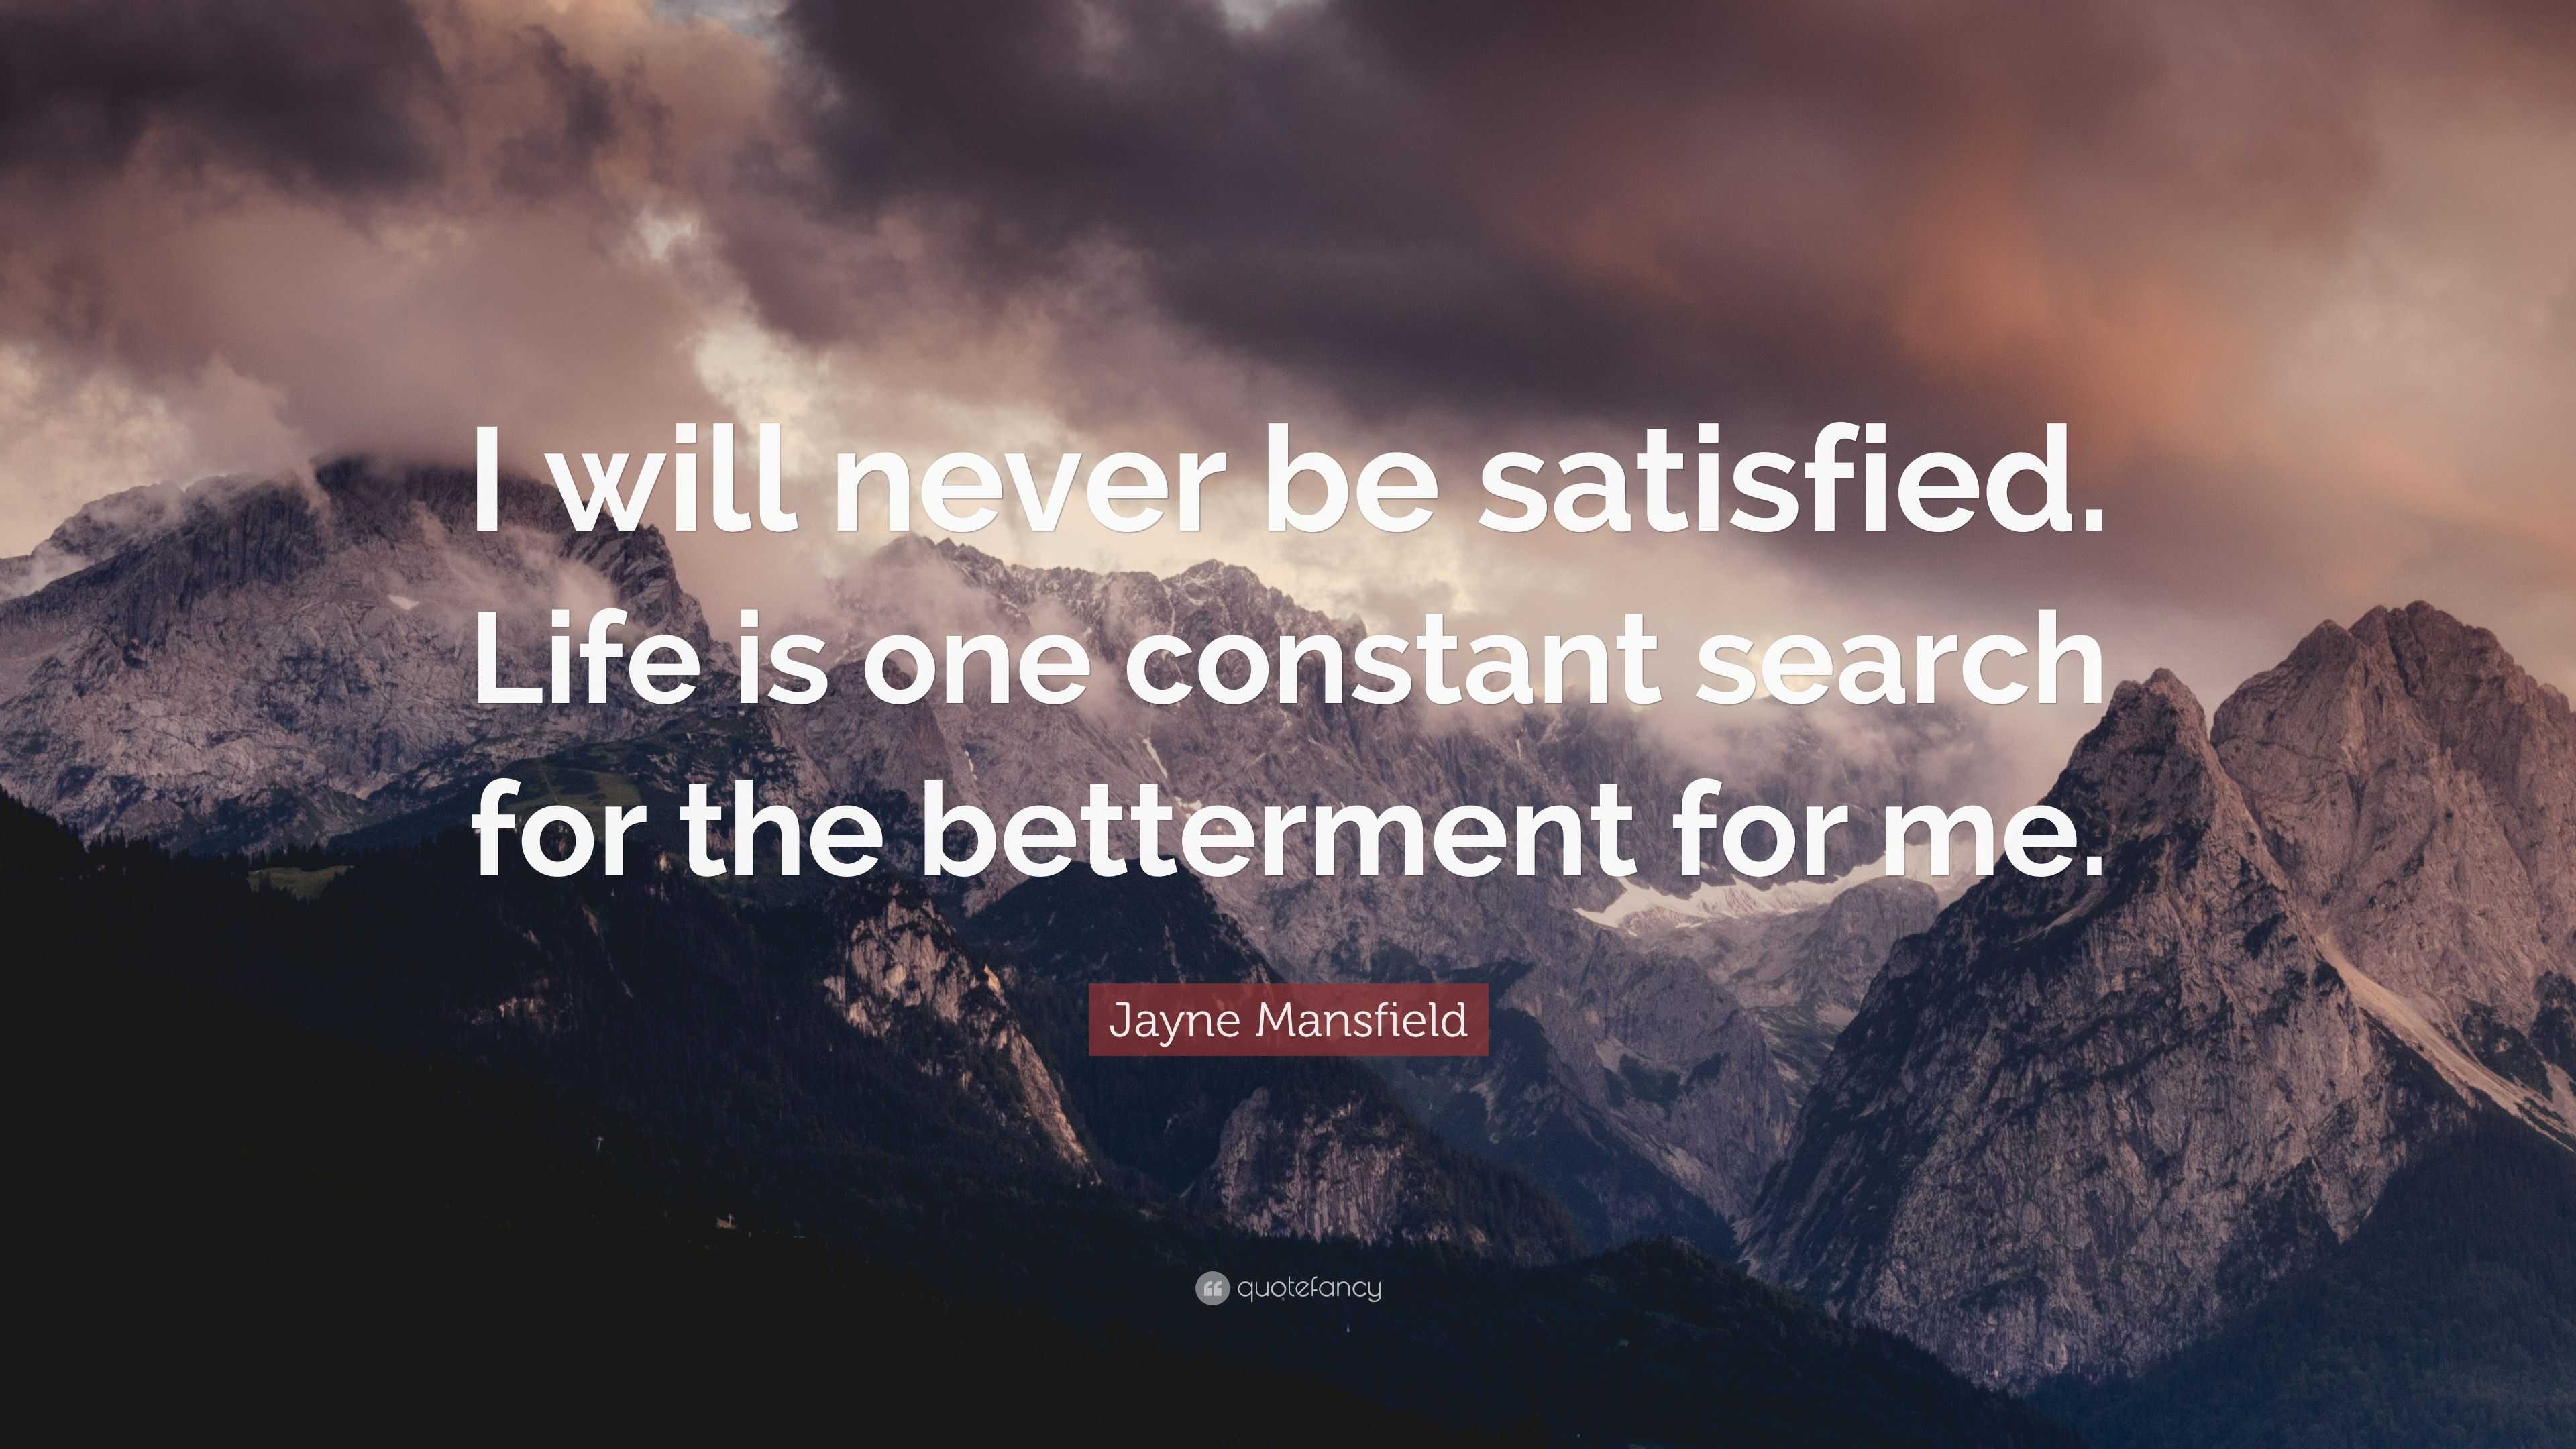 Jayne Mansfield Quote: "I will never be satisfied. Life is ...